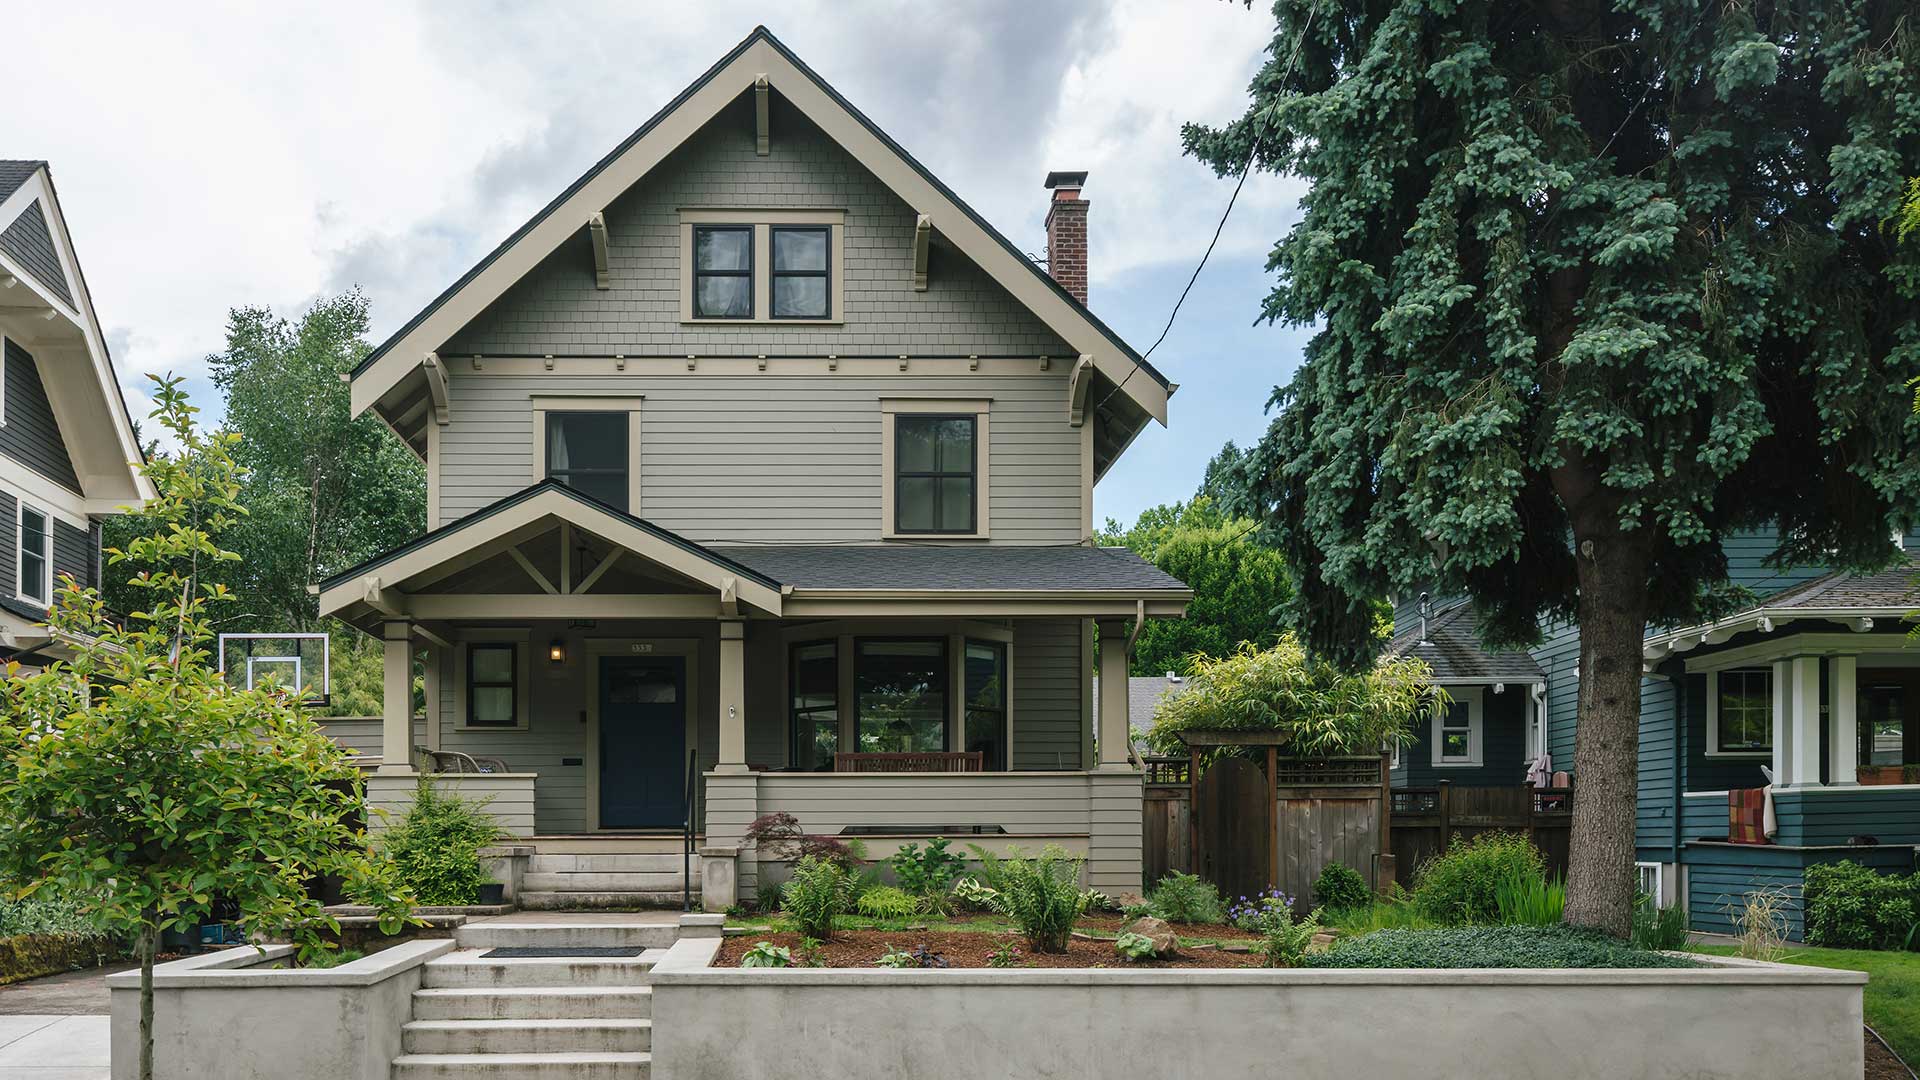 The Laurelhurst Craftsman is a stately three story home in a traditional Portland neighborhood. The renovated house fits perfectly in with its traditional neighbors.